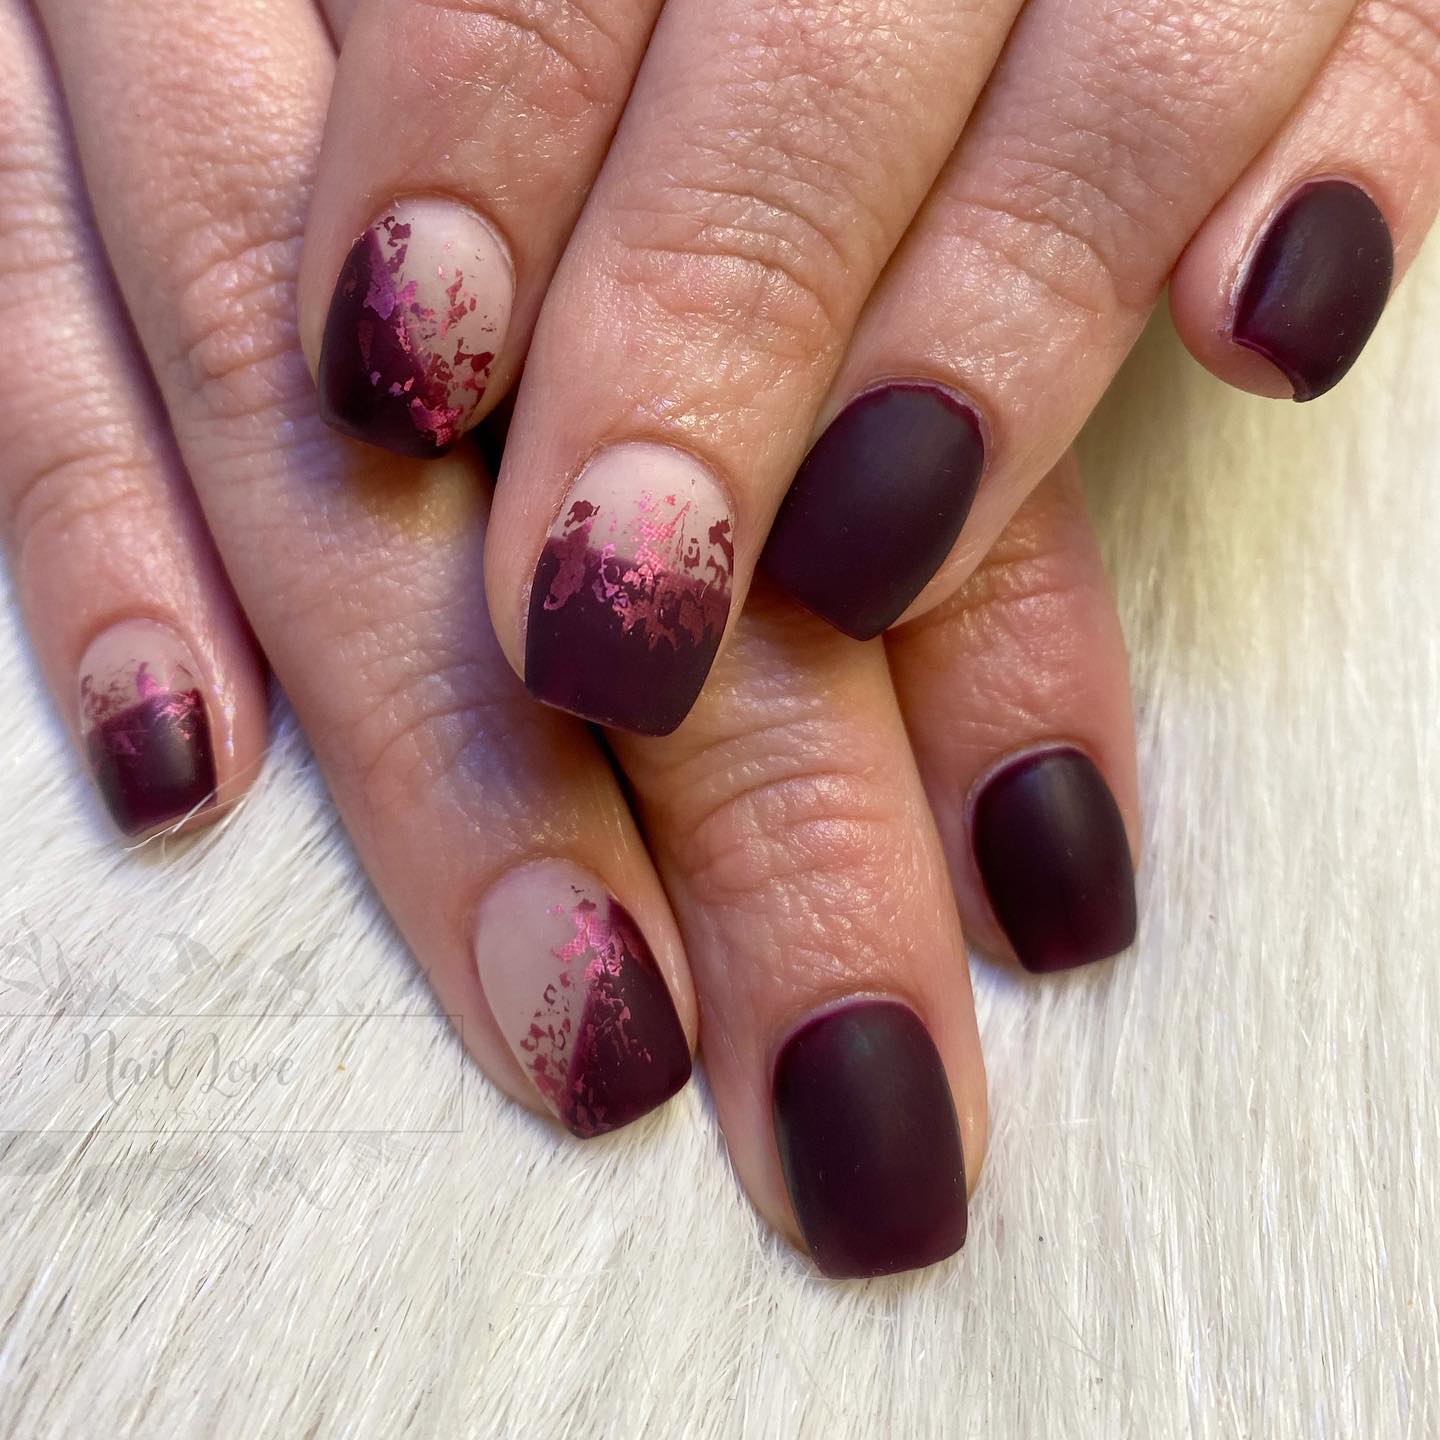 Demi Page Nails - Burgundy gel overlay with glitter & rhinestone nail art🖤🖤  done on @robyn_c_adams #burgundy #burgundynails #gel #geloverlay  #naturalnails #rhinestonenails #gemnails #shinynails #glitternails  #nailsoftheday #nailart #nailsofinstagram ...